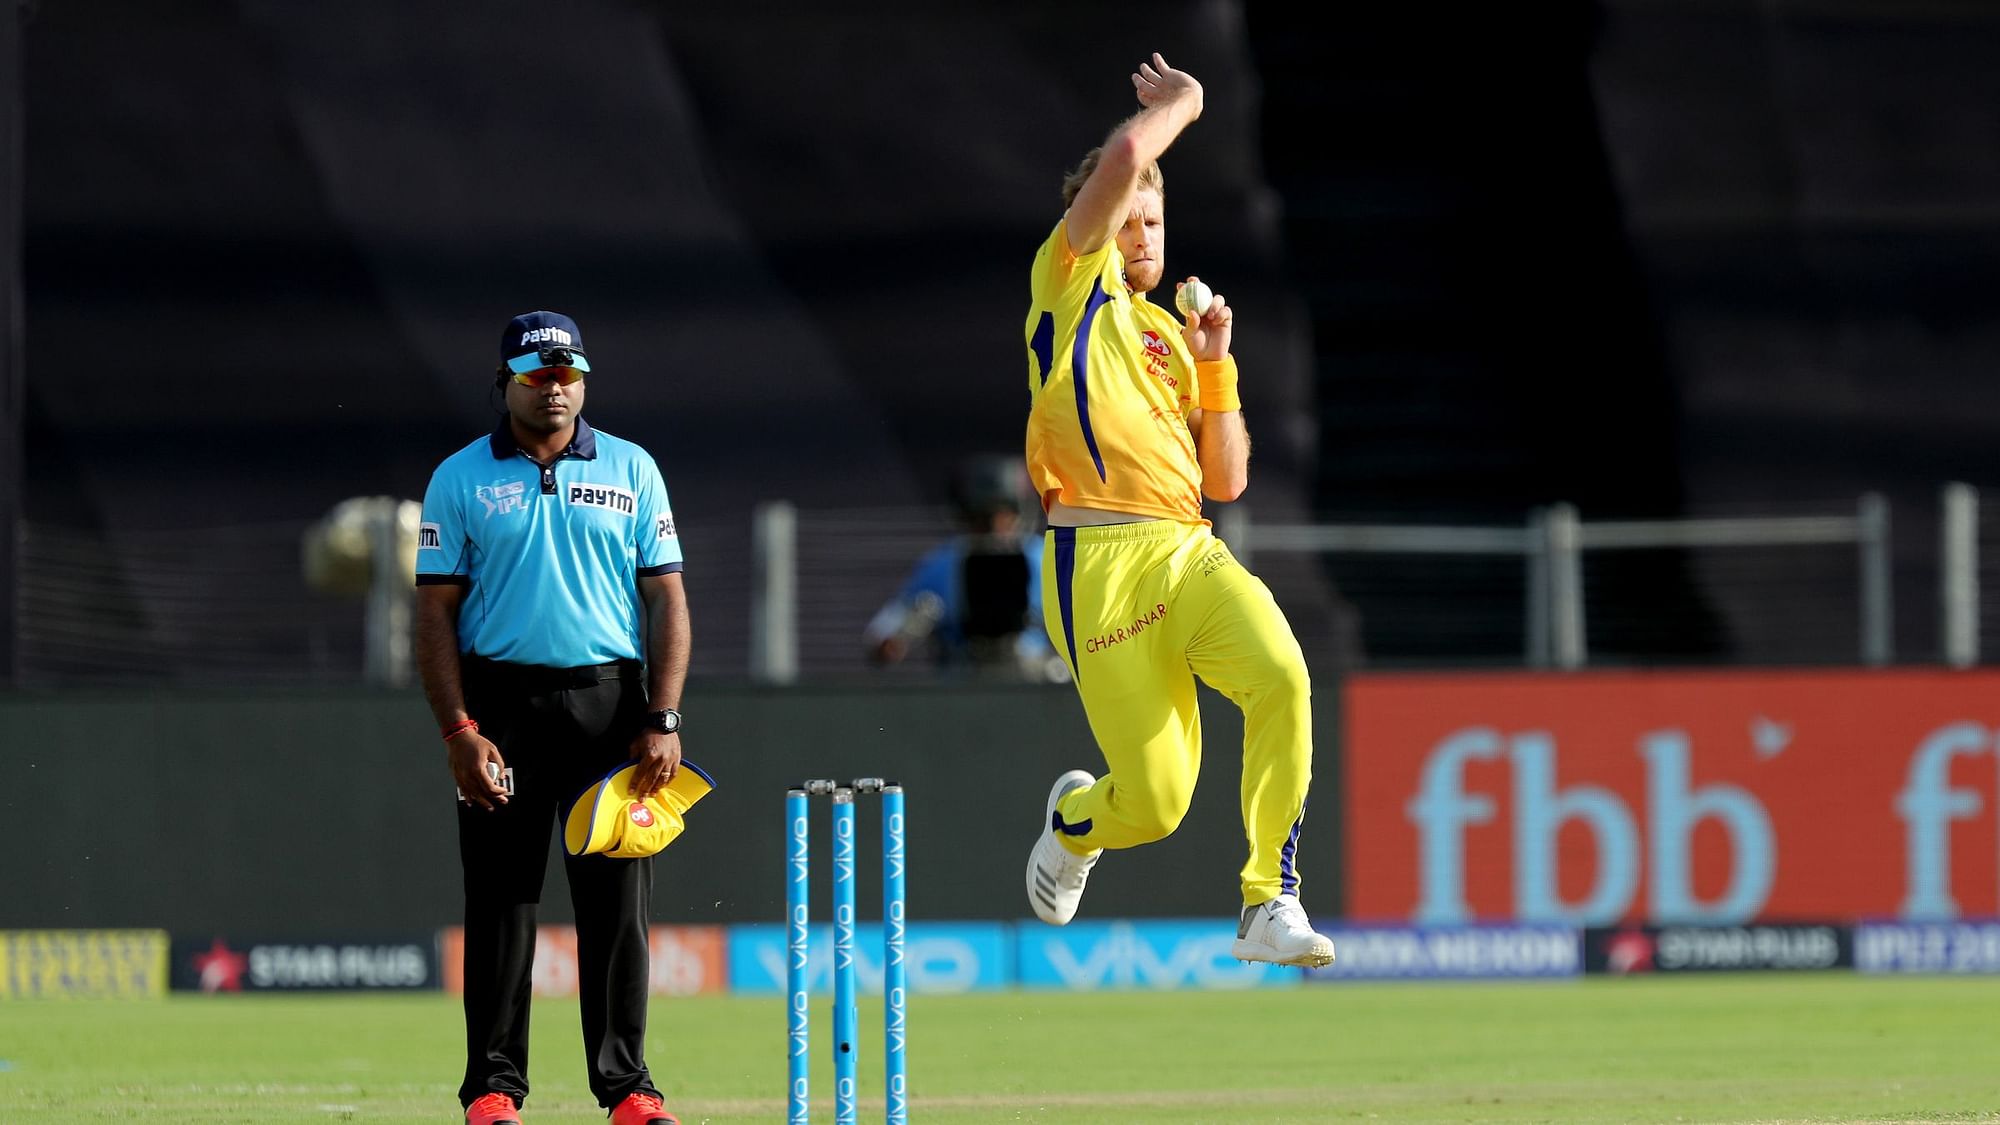 David Willey said CSK were very understanding and supportive, adding it was not an easy decision for him to take.